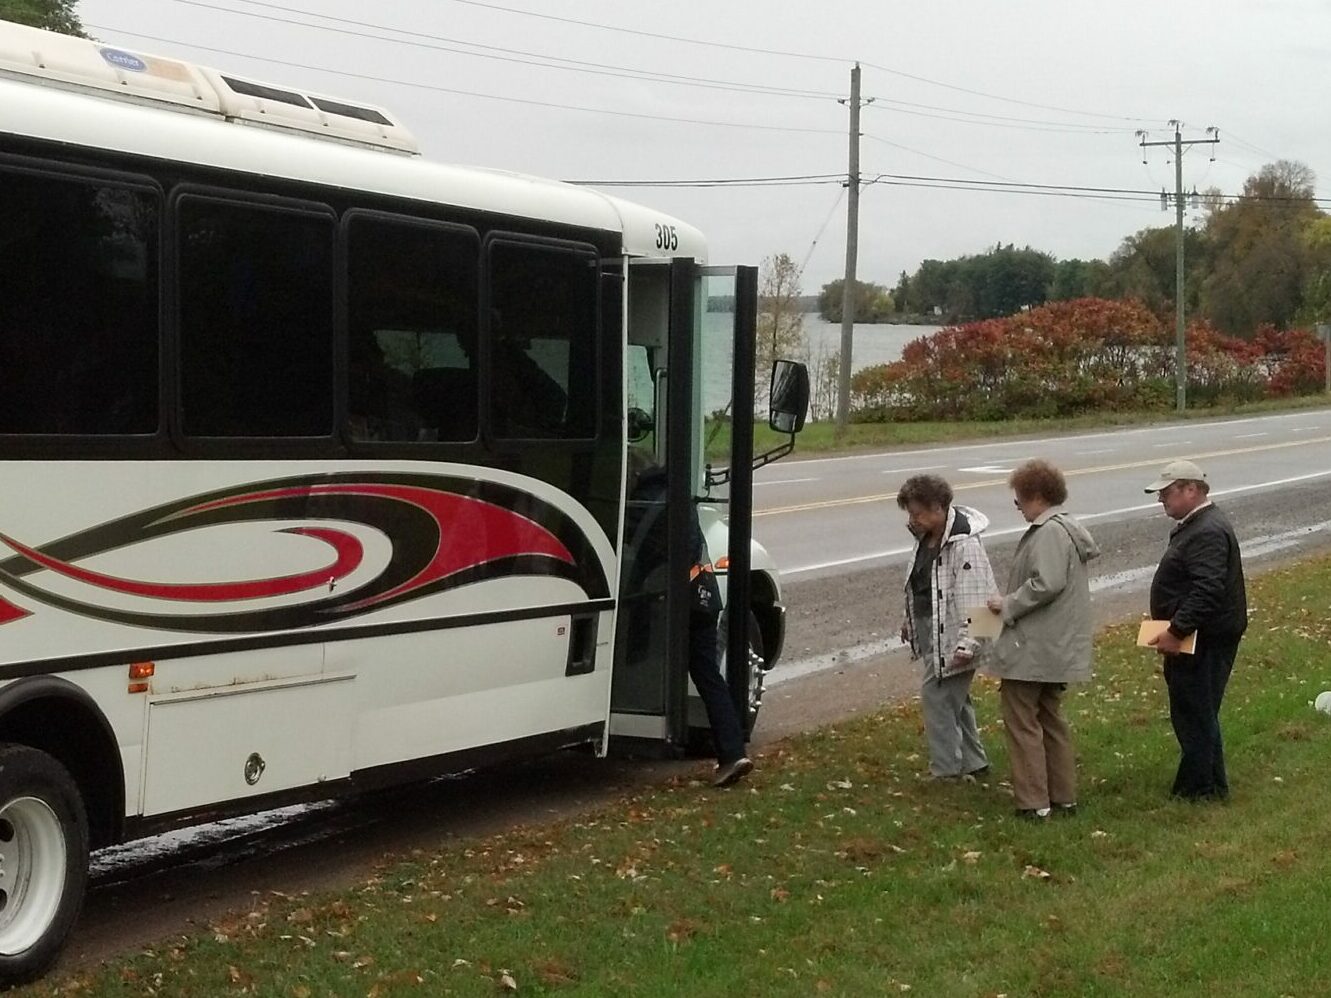 group of people boarding a bus.